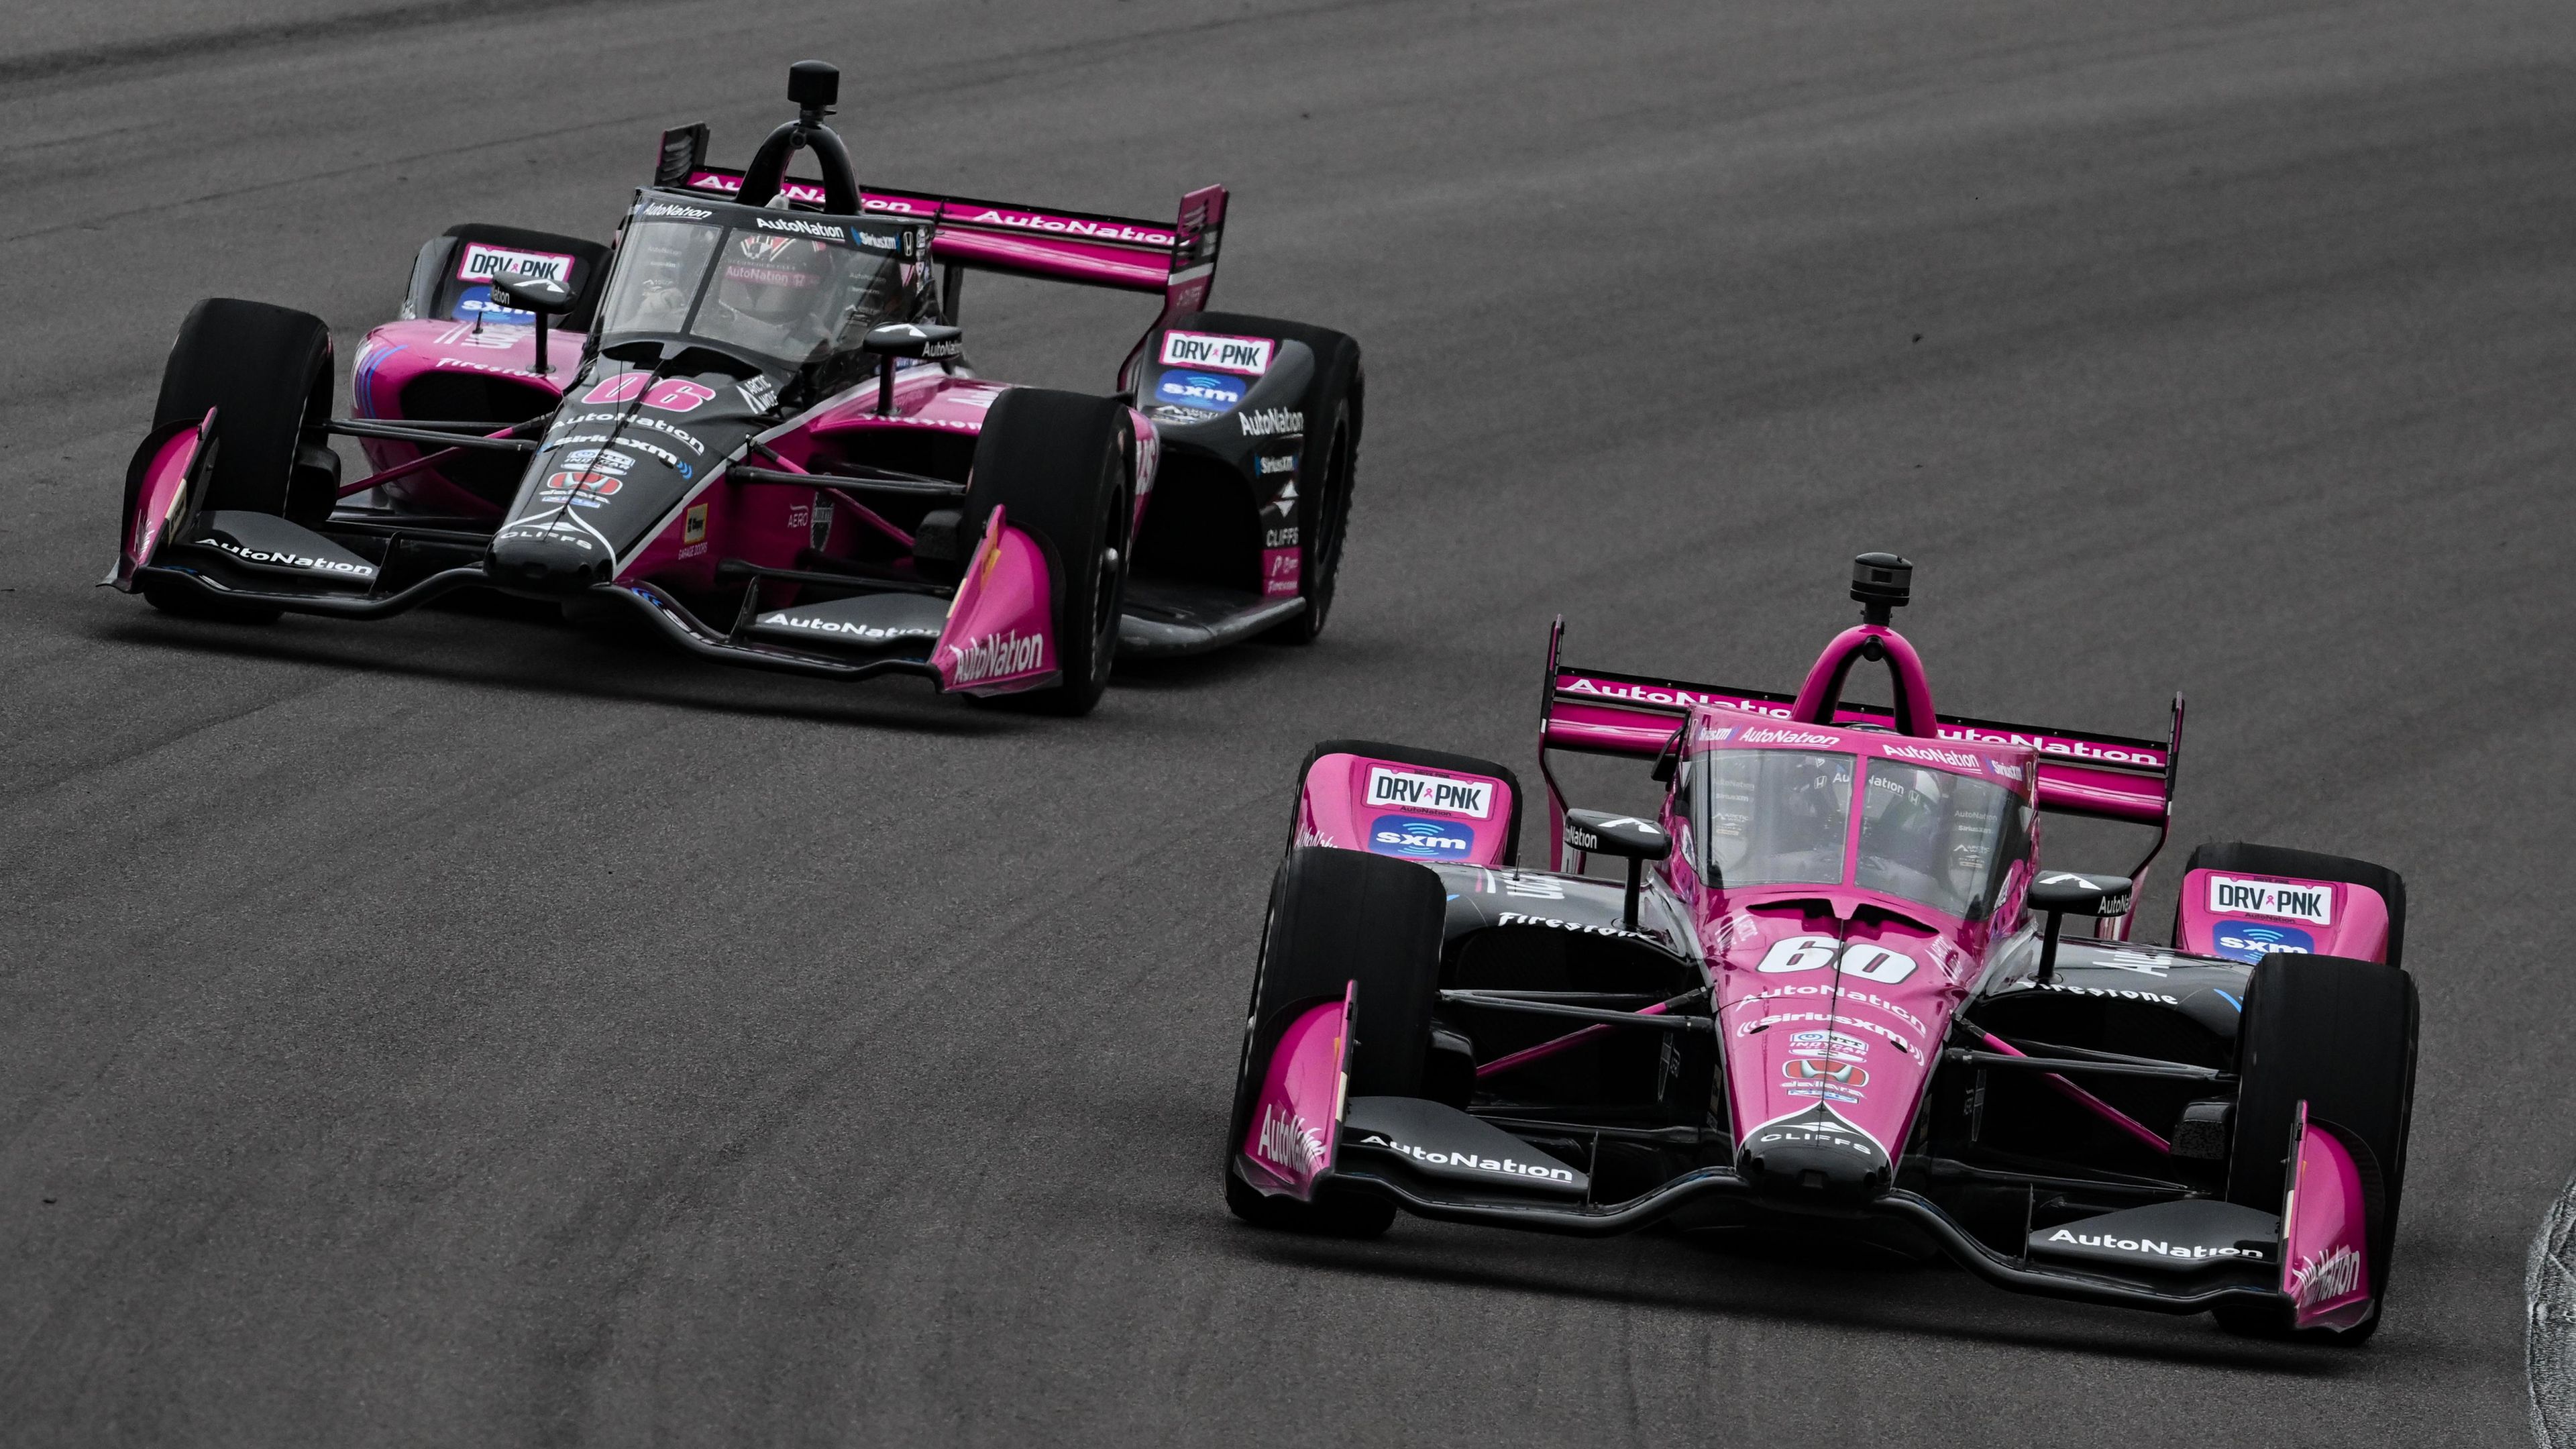 Tom Blomqvist will pilot the No.60 at Meyer Shank Racing in the final two races of the 2023 IndyCar season before taking over the No.06 in 2024.